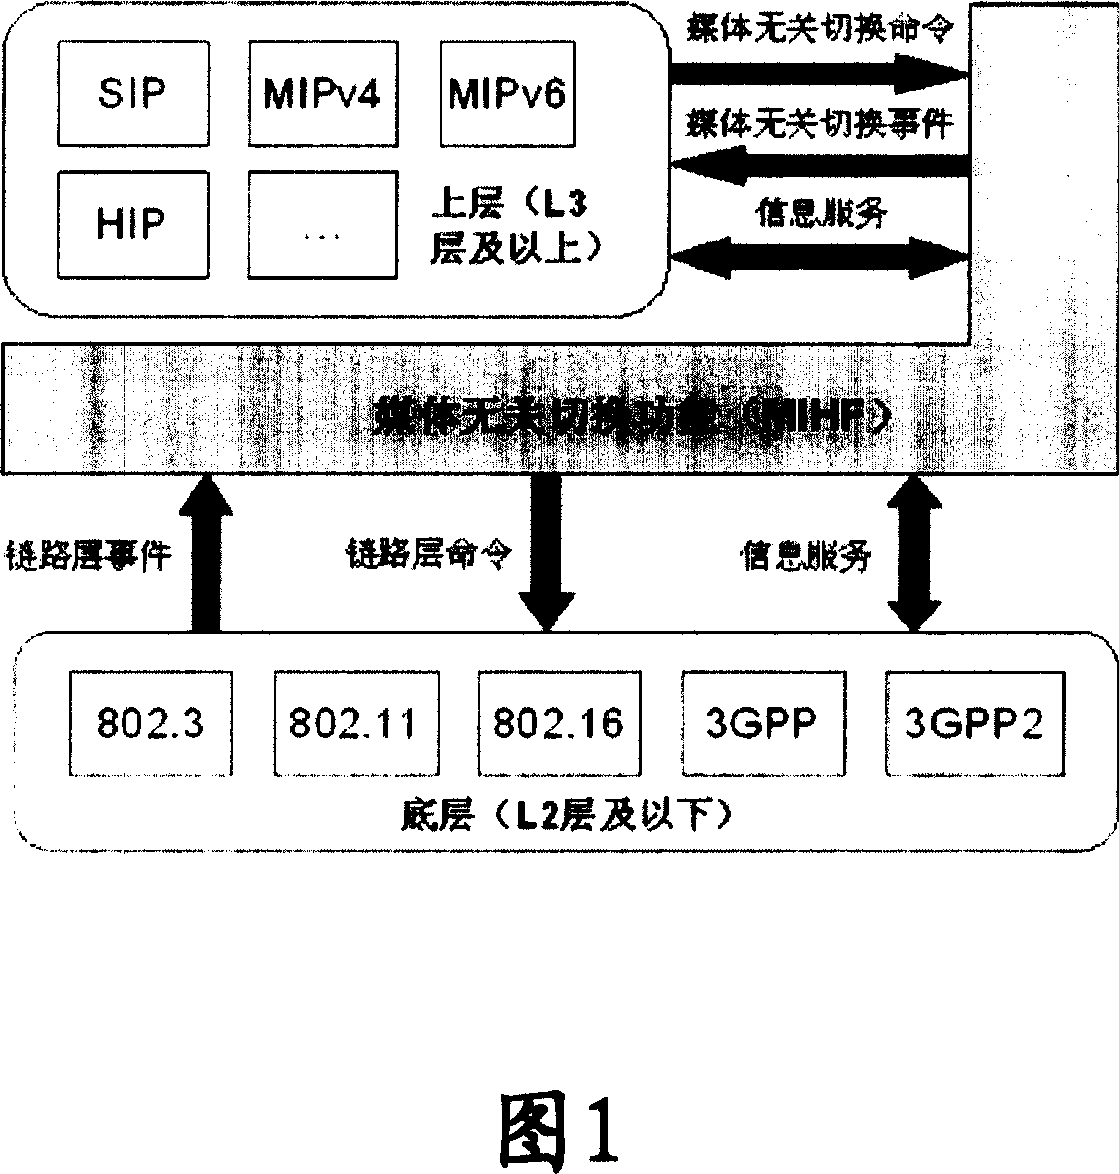 Method for obtaining supported service information by independent medium switching functional entity